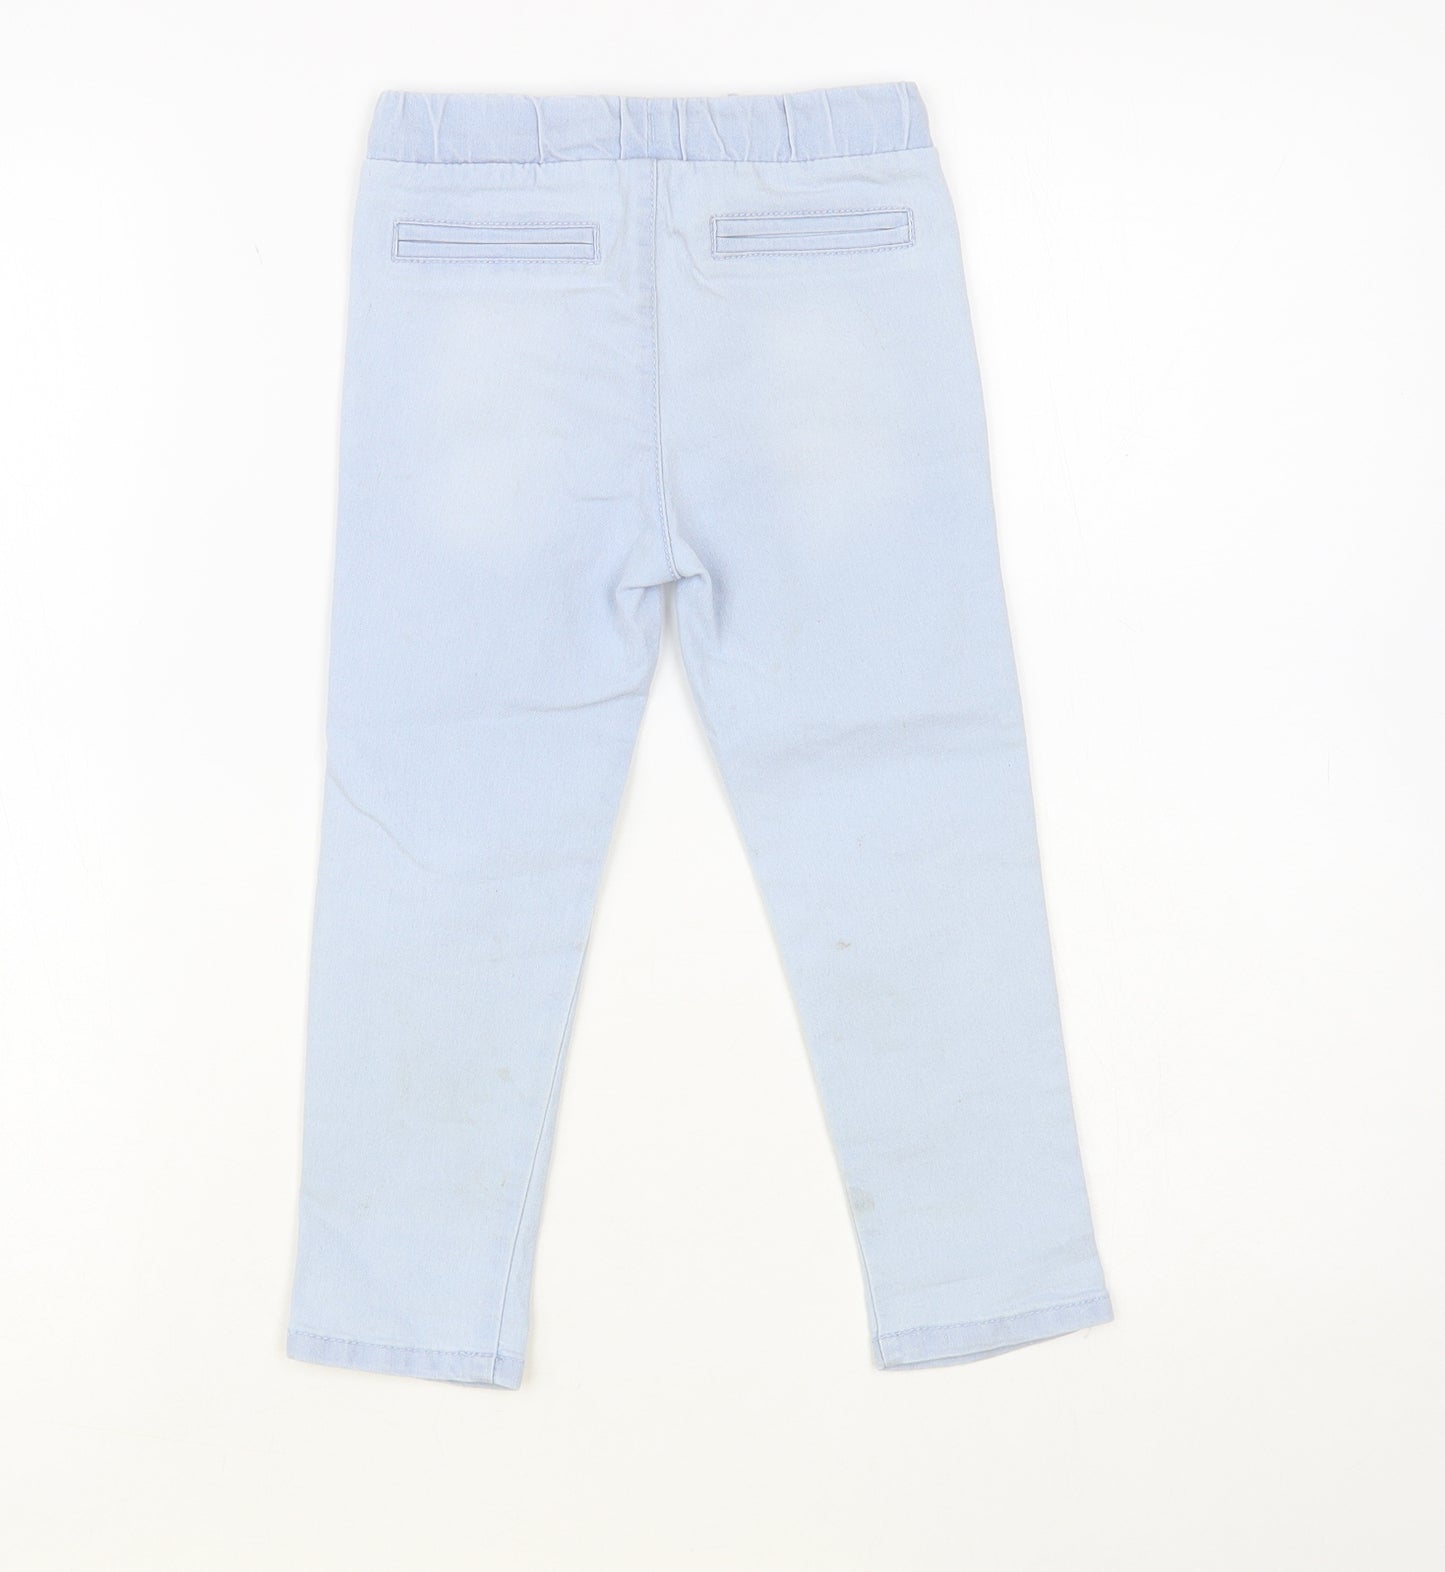 So Cute Girls Blue Cotton Straight Jeans Size 2-3 Years Regular Drawstring - Smile Everyday